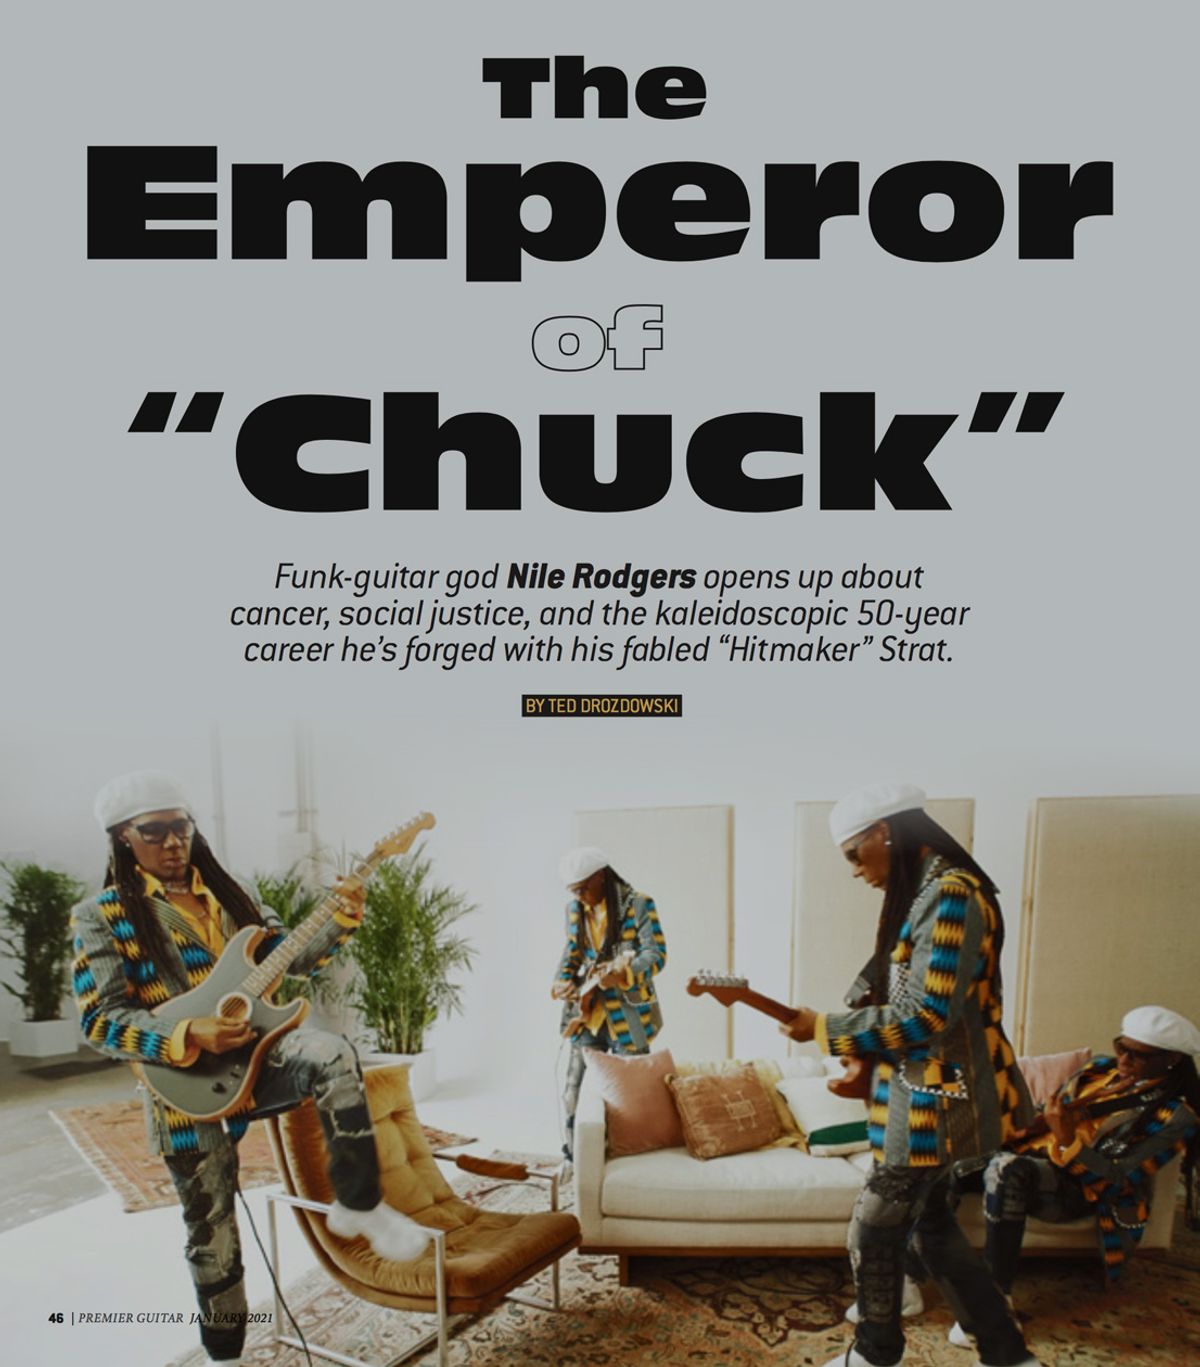 Nile Rodgers—The Emperor of “Chuck”